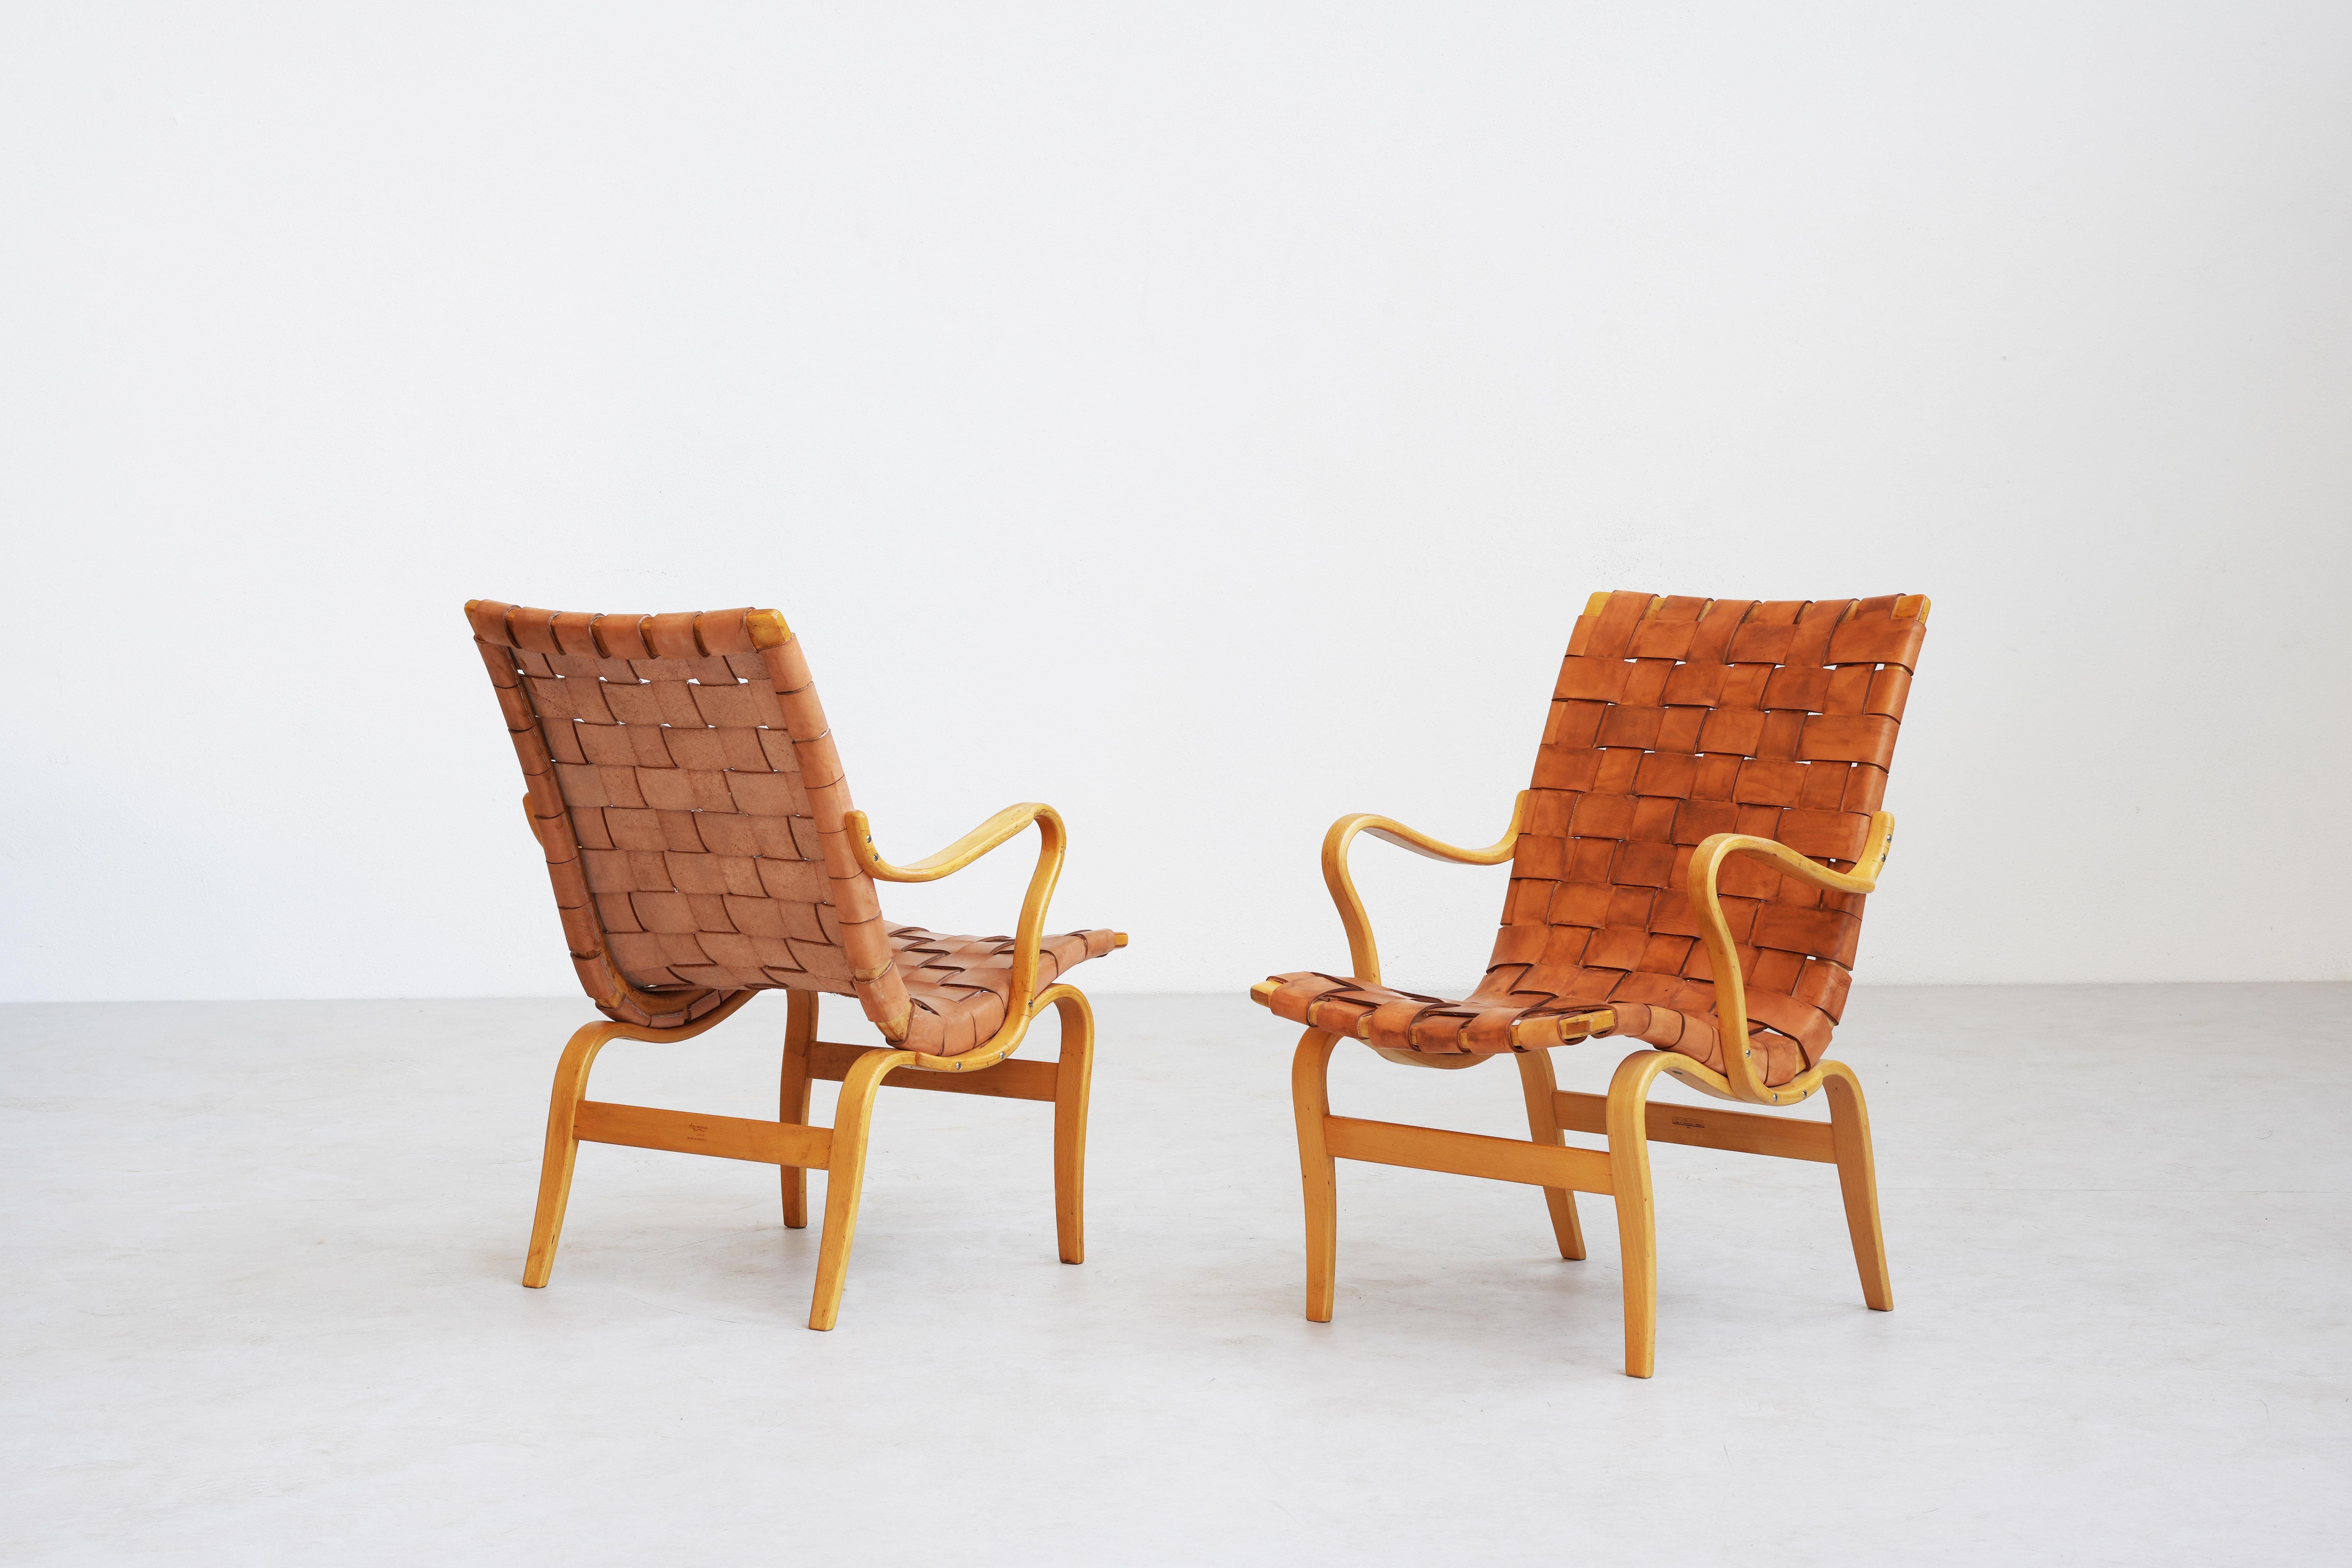 20th Century Pair of Swedish Lounge Chairs Mod. Eva by Bruno Mathsson, 1960ies Sweden For Sale